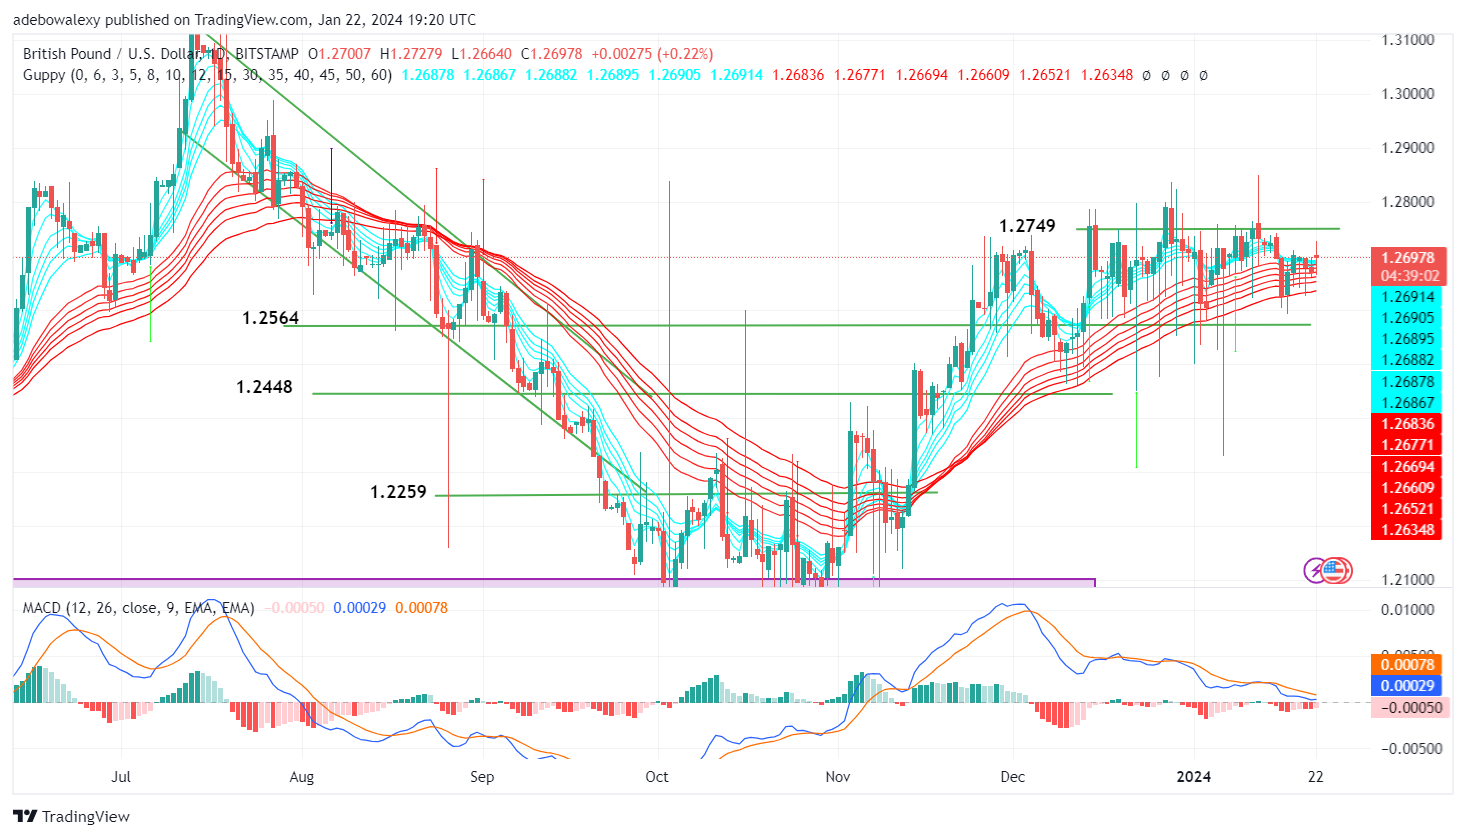 GBPUSD Price Action Lacks Direction at High Altitudes